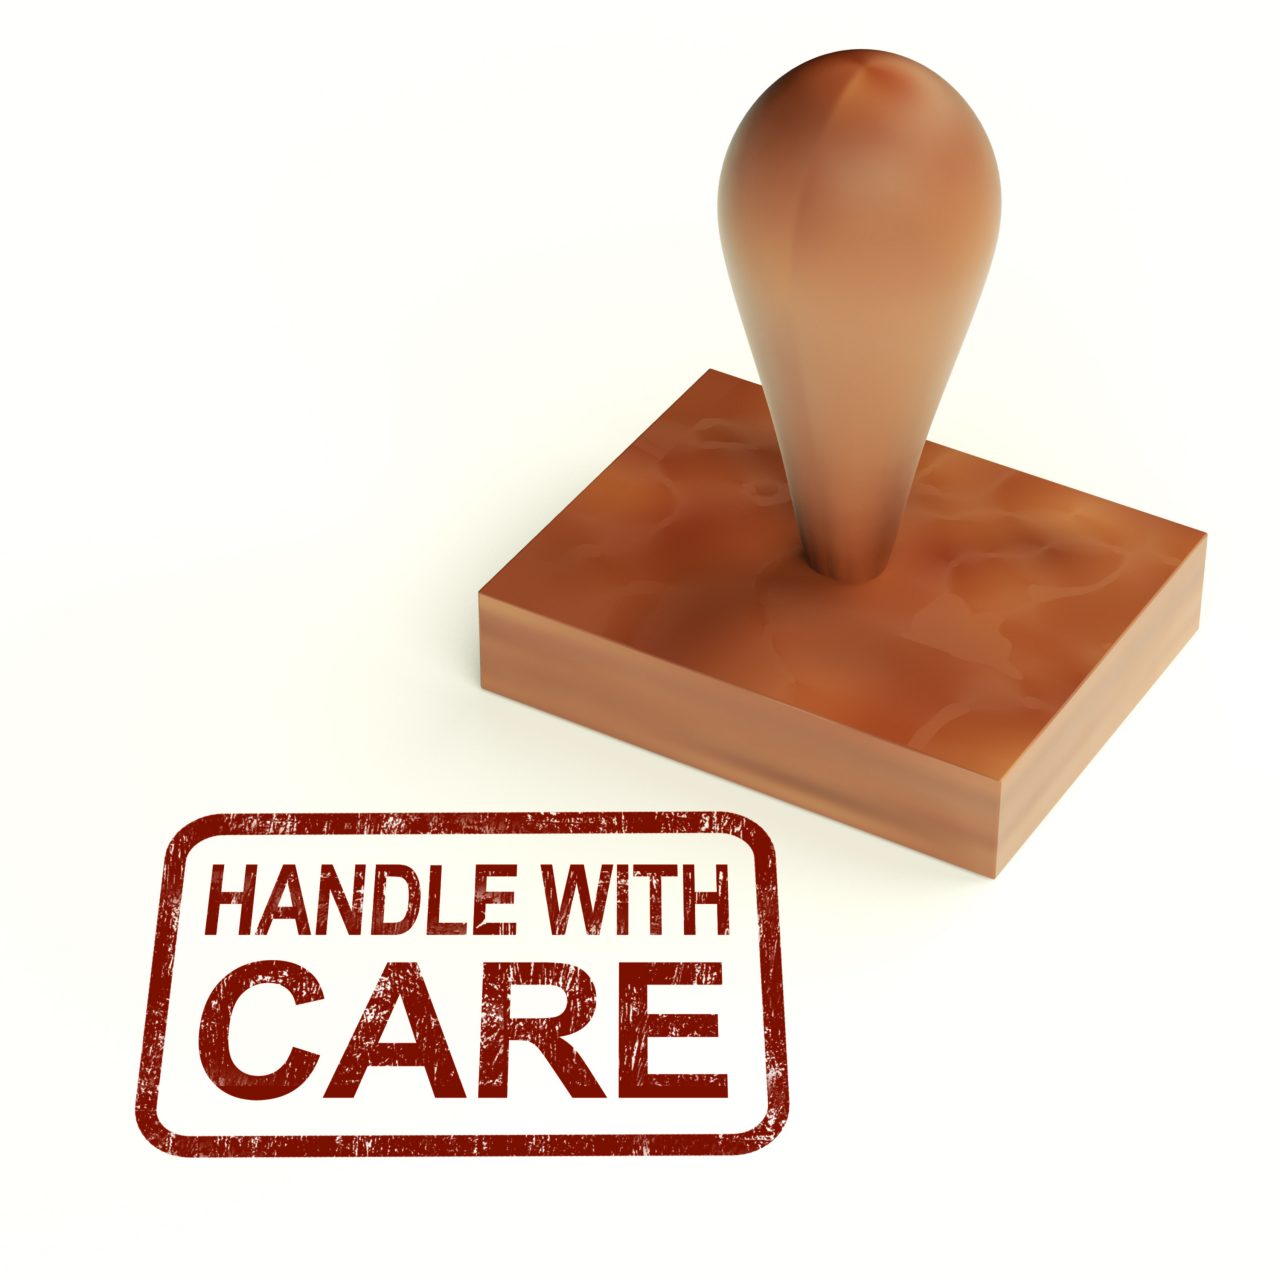 Product care, handle with care stamp